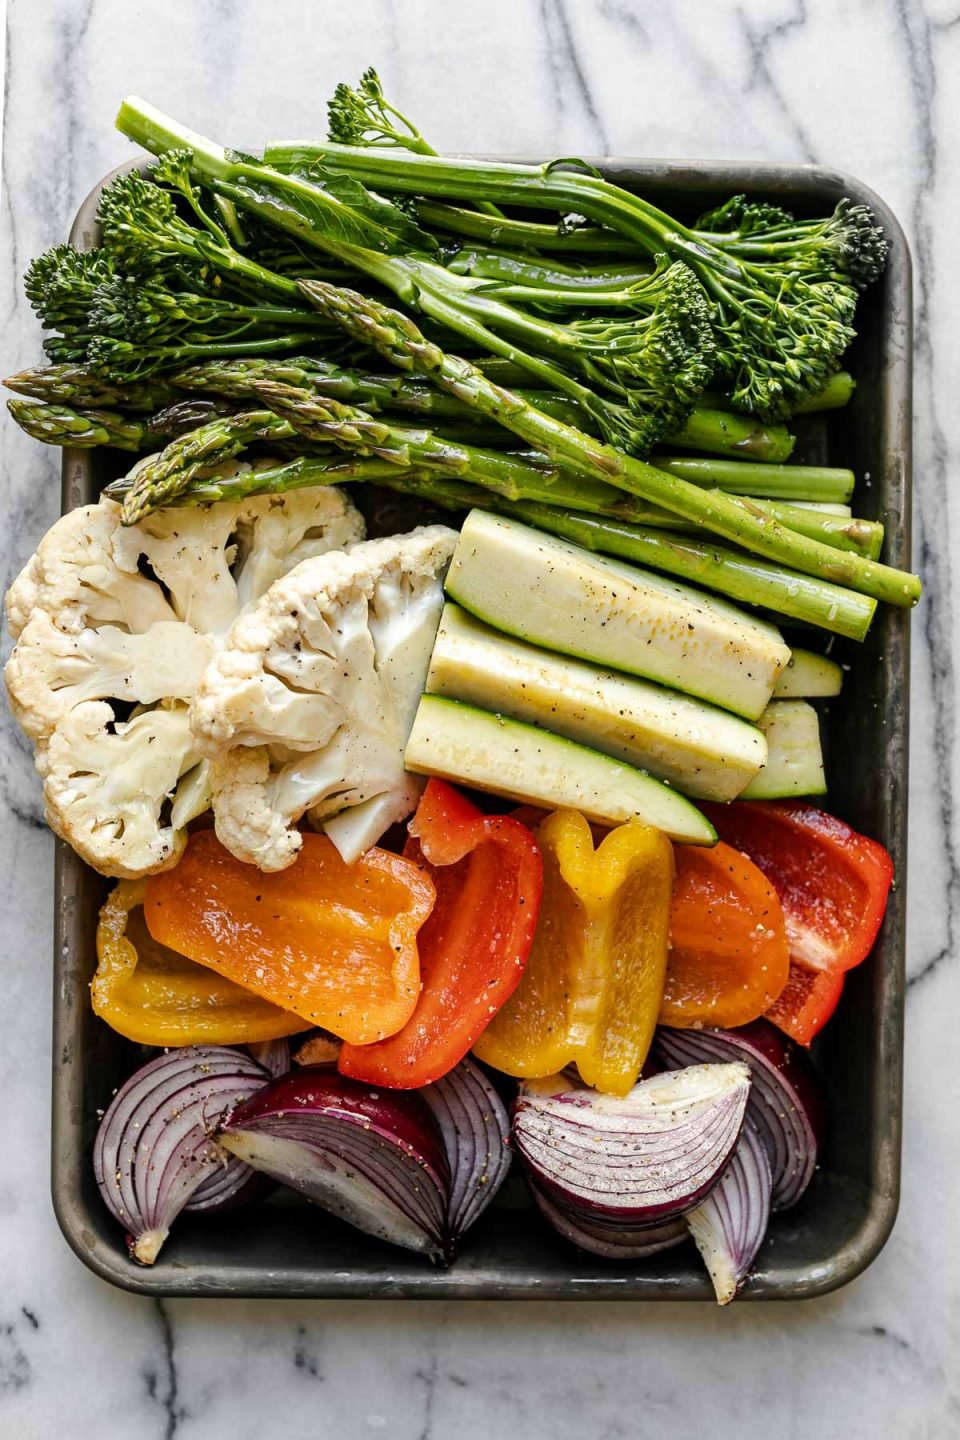 A variety of veggies including broccolini, asparagus, cauliflower, zucchini, onion, & peppers on a aluminum baking sheet. The baking sheet rests on a white & gray marble surface.